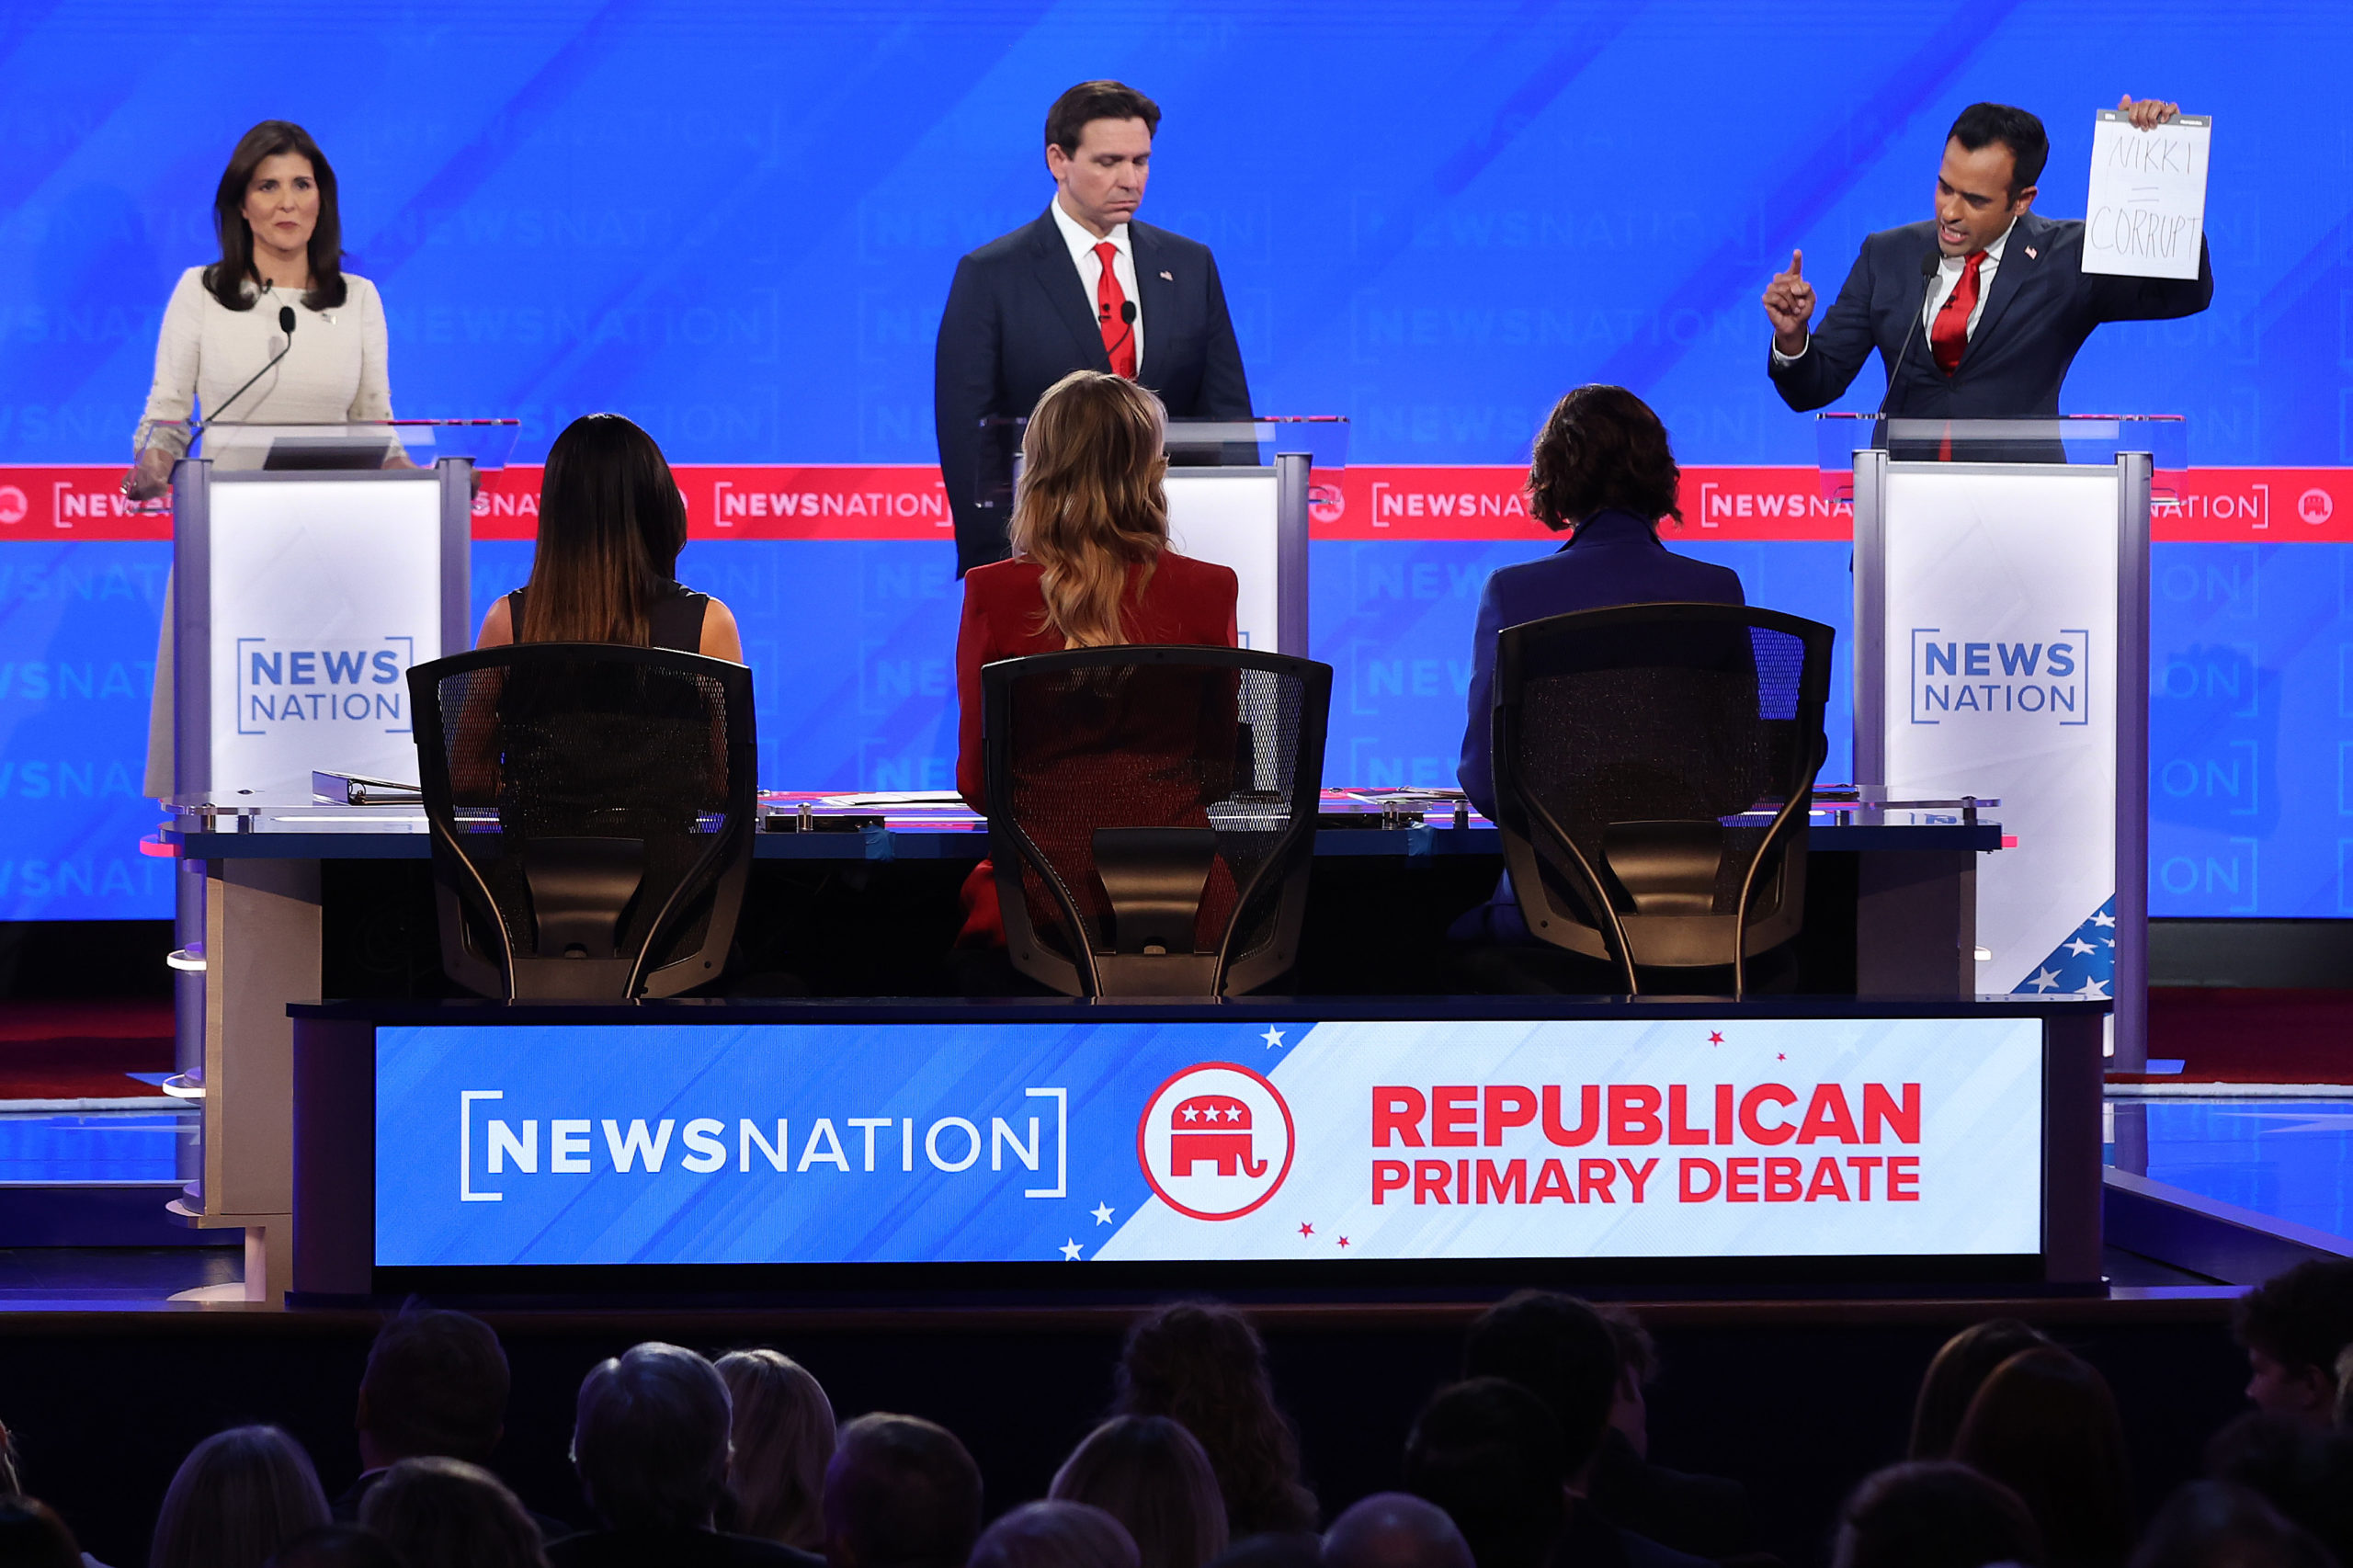 TUSCALOOSA, ALABAMA - DECEMBER 06: Republican presidential candidates (L-R) former U.N. Ambassador Nikki Haley, Florida Gov. Ron DeSantis and Vivek Ramaswamy participate in the NewsNation Republican Presidential Primary Debate at the University of Alabama Moody Music Hall on December 6, 2023 in Tuscaloosa, Alabama. The four presidential hopefuls squared off during the fourth Republican primary debate without current frontrunner and former U.S. President Donald Trump, who has declined to participate in any of the previous debates. (Photo by Justin Sullivan/Getty Images)